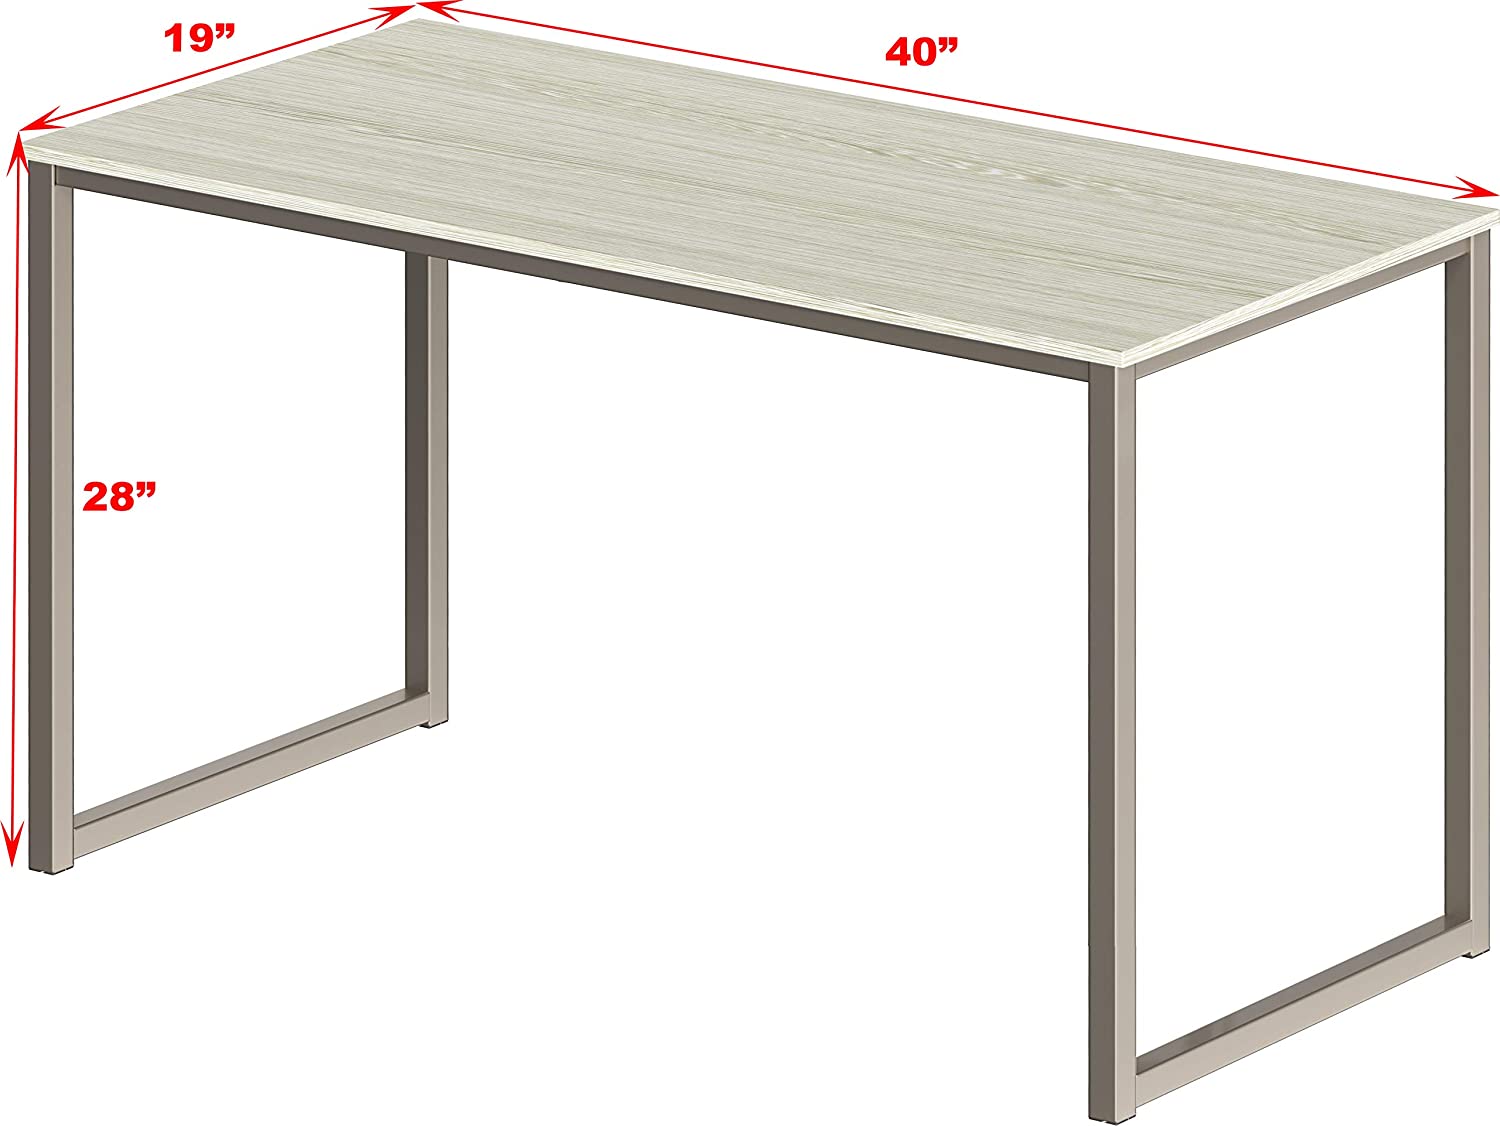 SHW Home Office 40-Inch Computer Desk, Maple - image 5 of 6